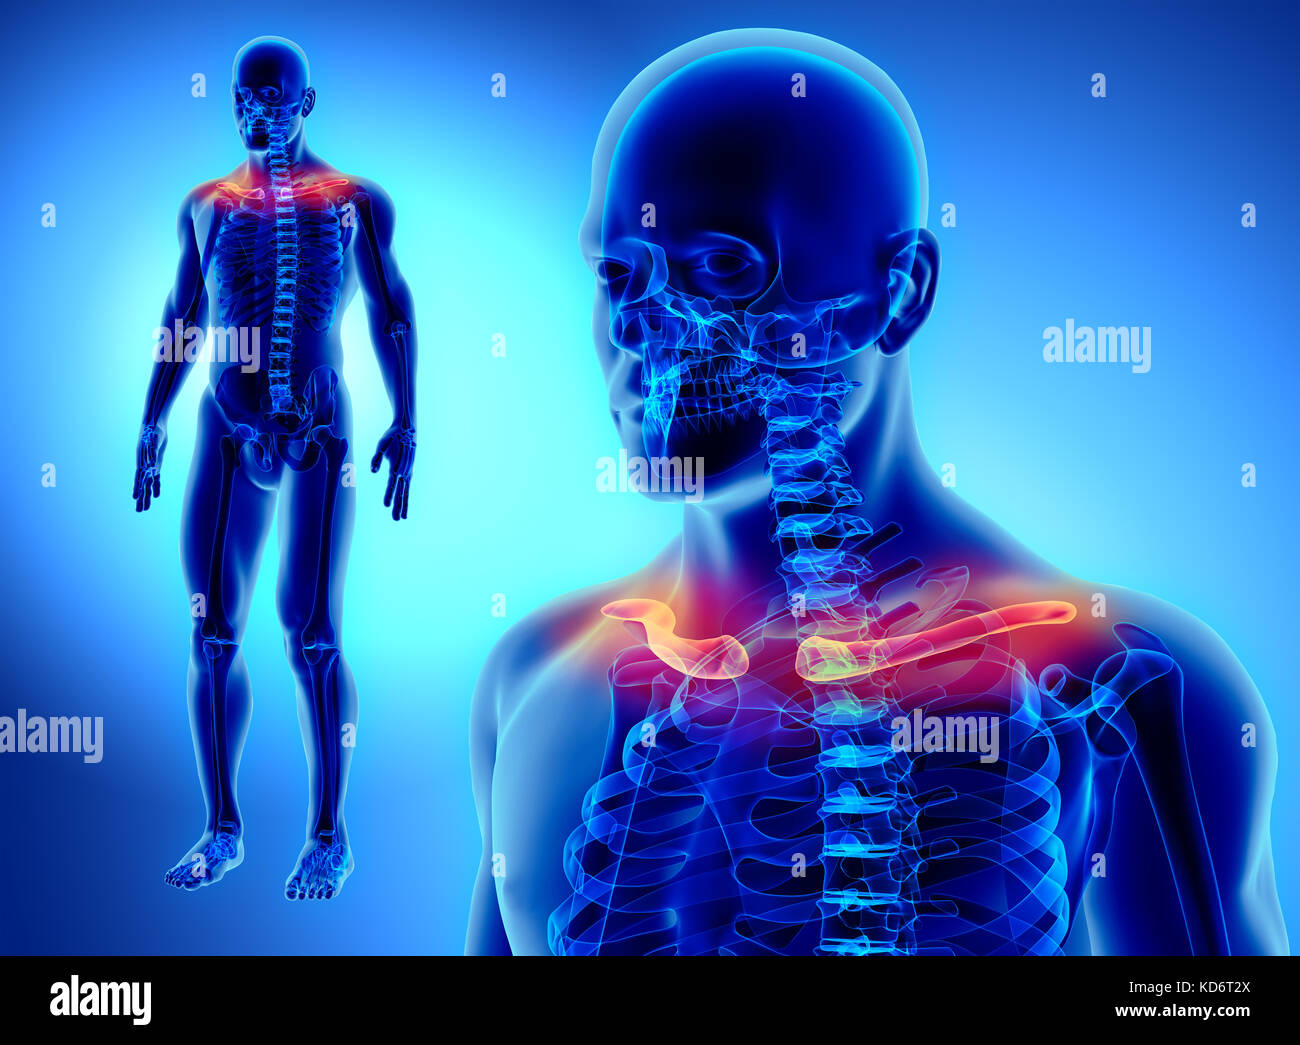 3D illustration of Clavicle - Part of Human Skeleton. Stock Photo